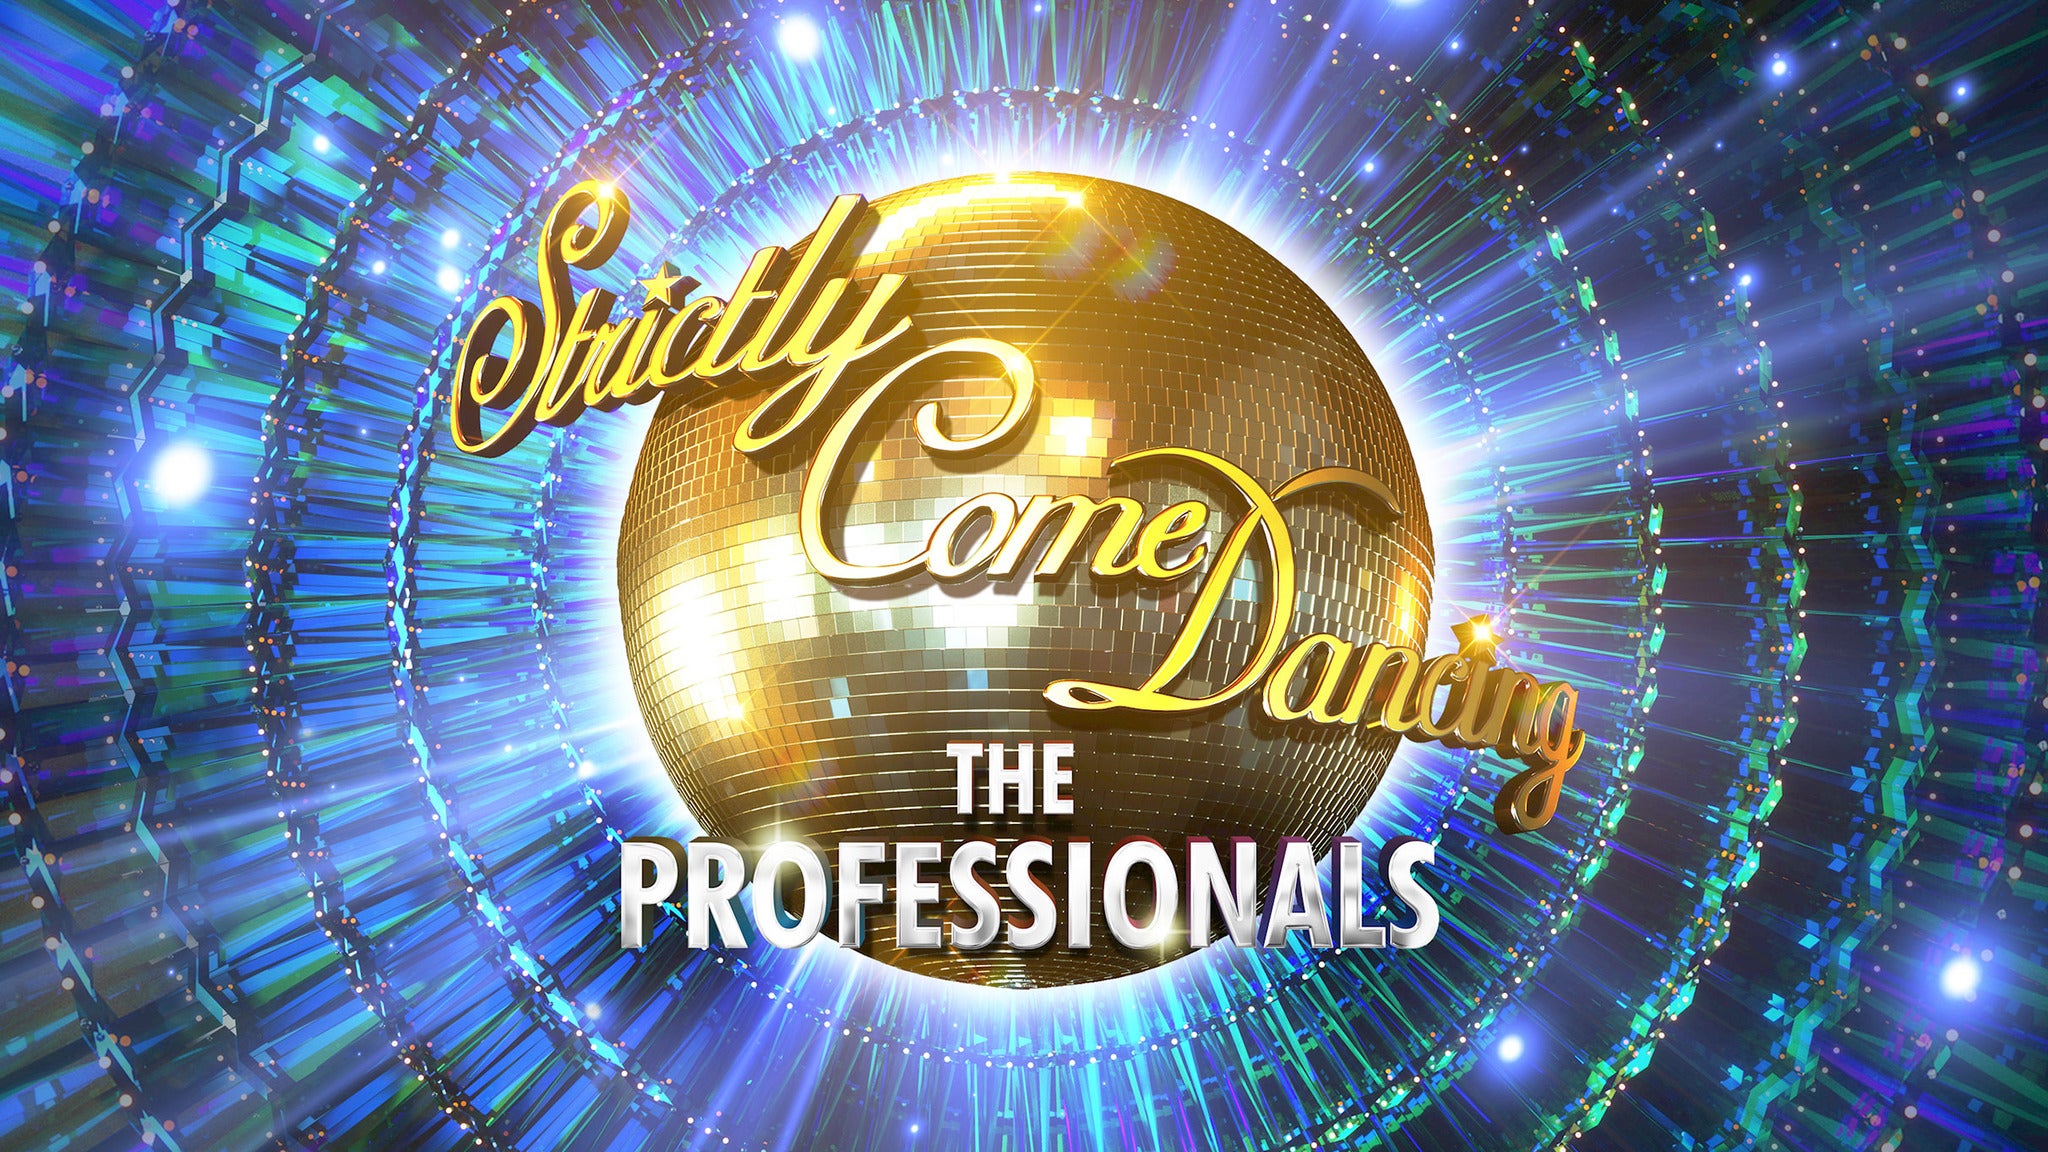 Strictly Come Dancing - the Professionals Tour 2022 Event Title Pic